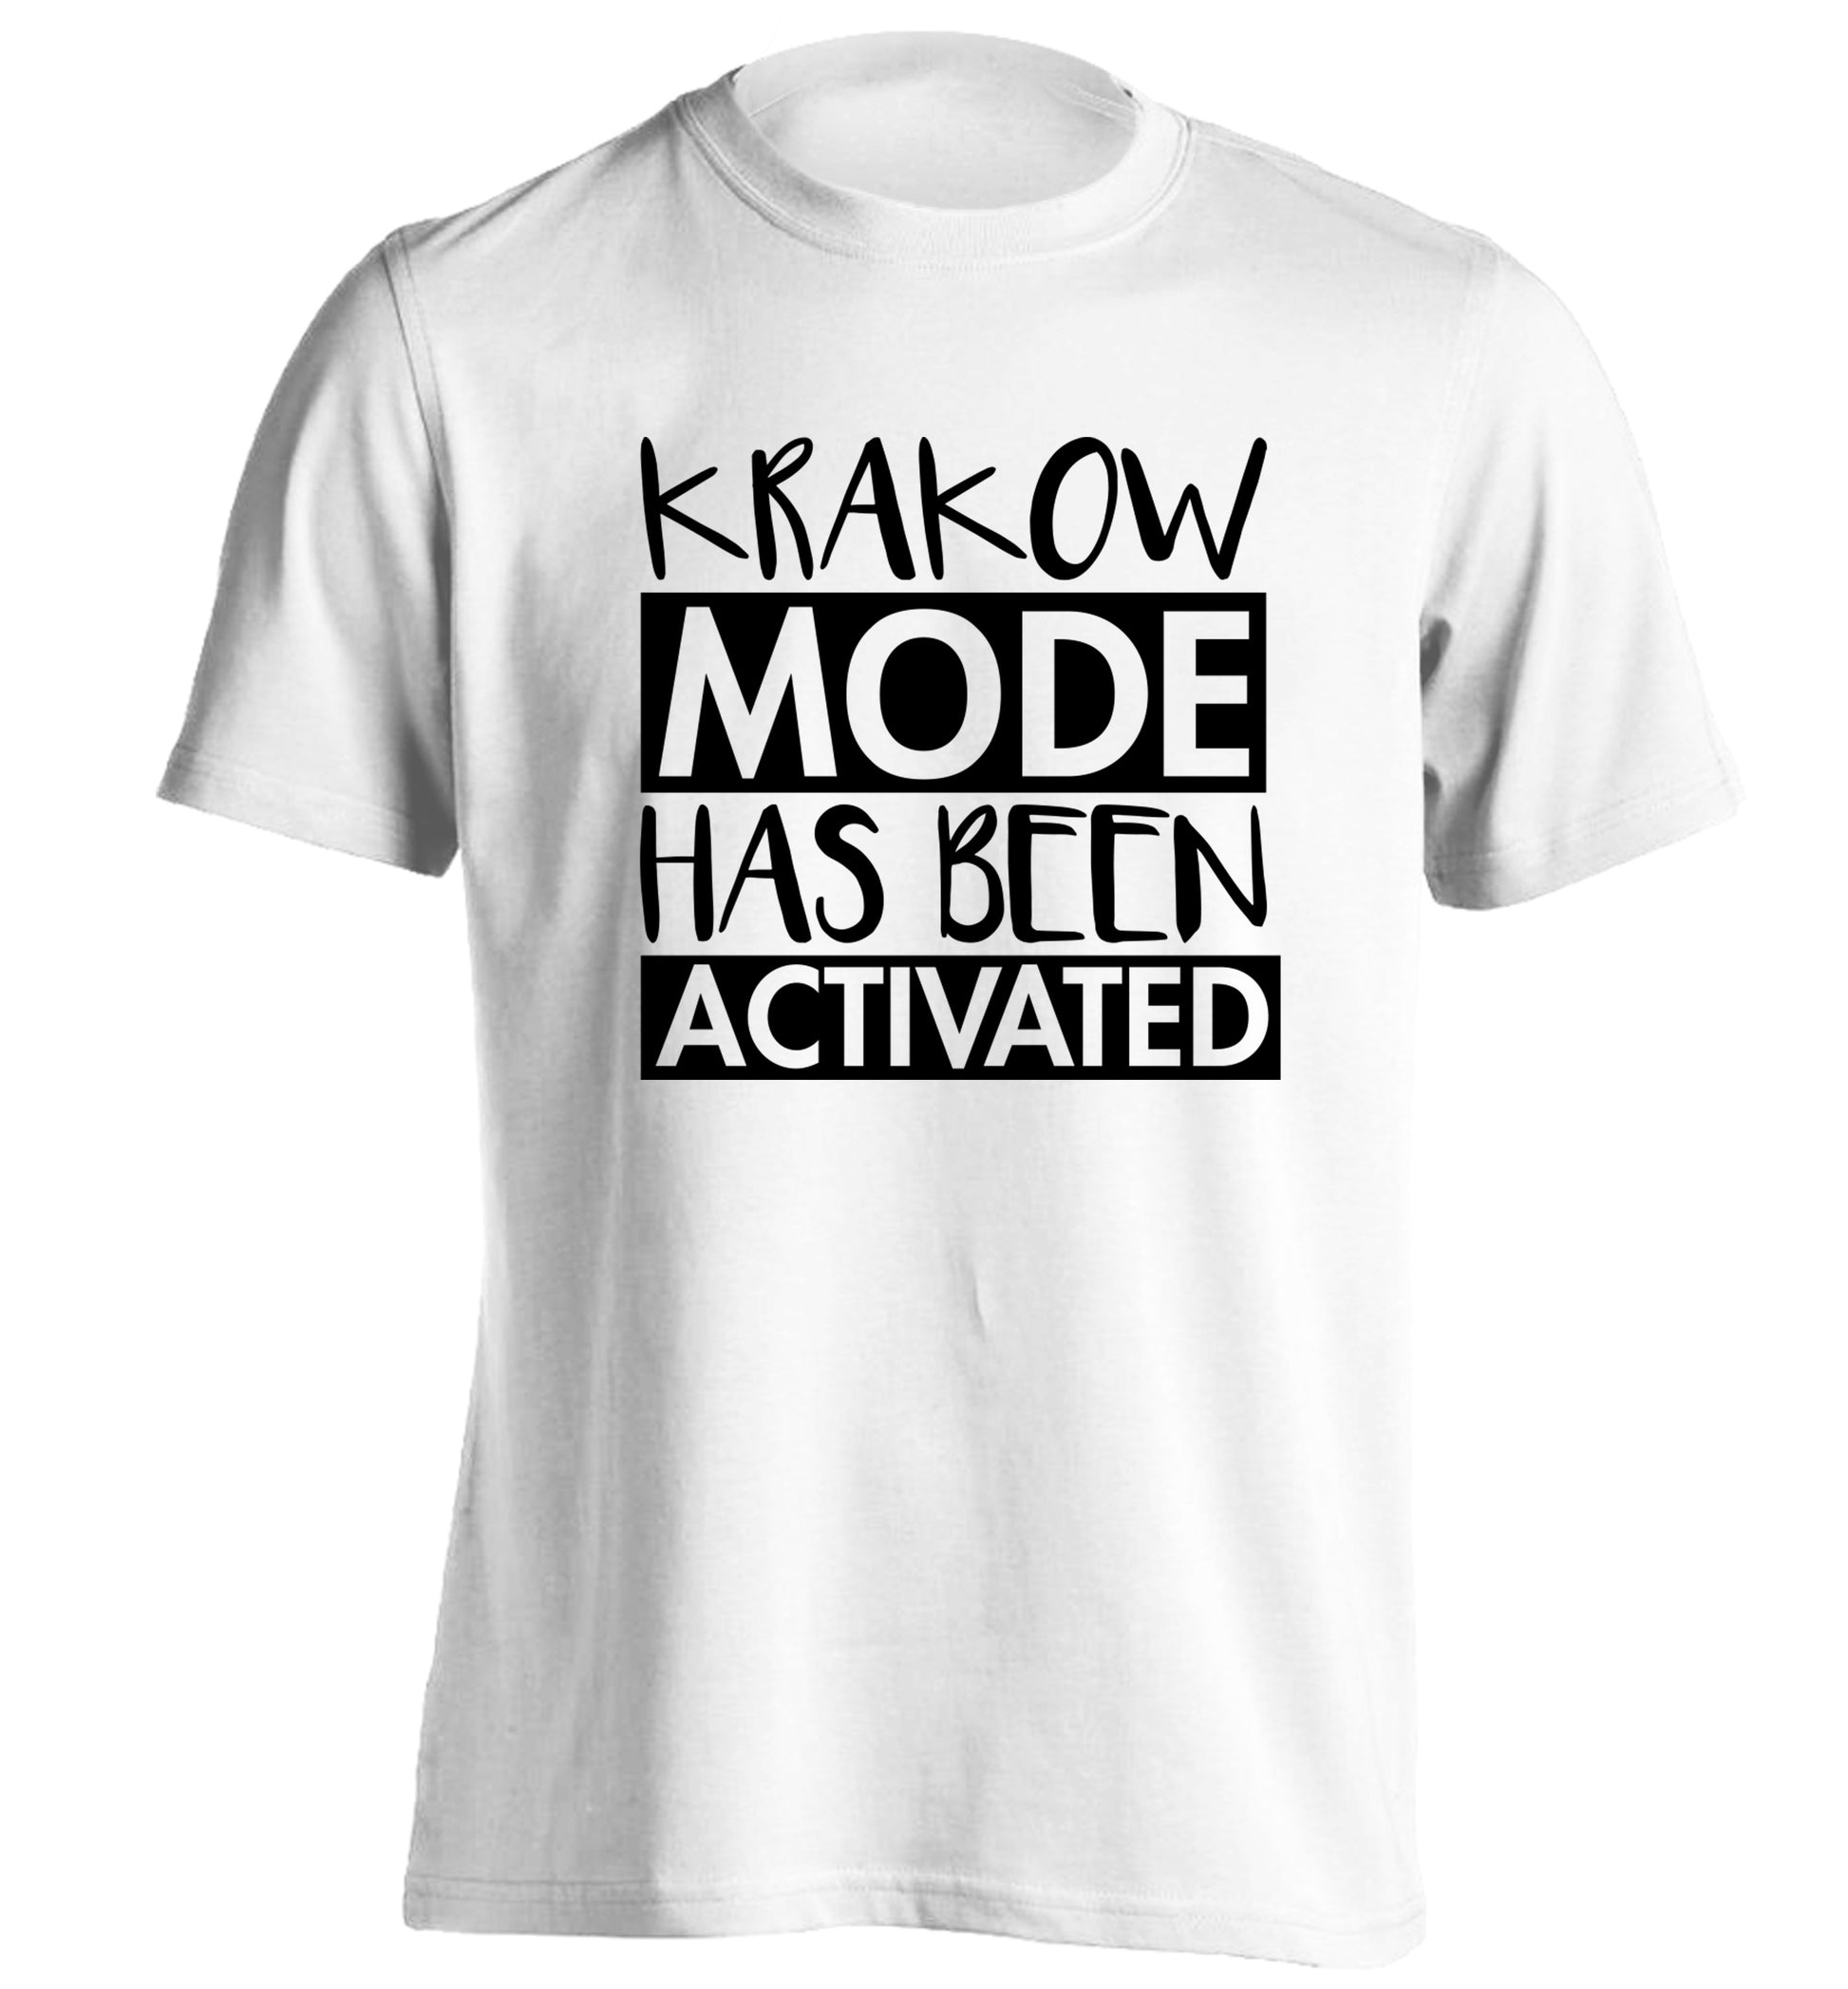 Krakow mode has been activated adults unisex white Tshirt 2XL